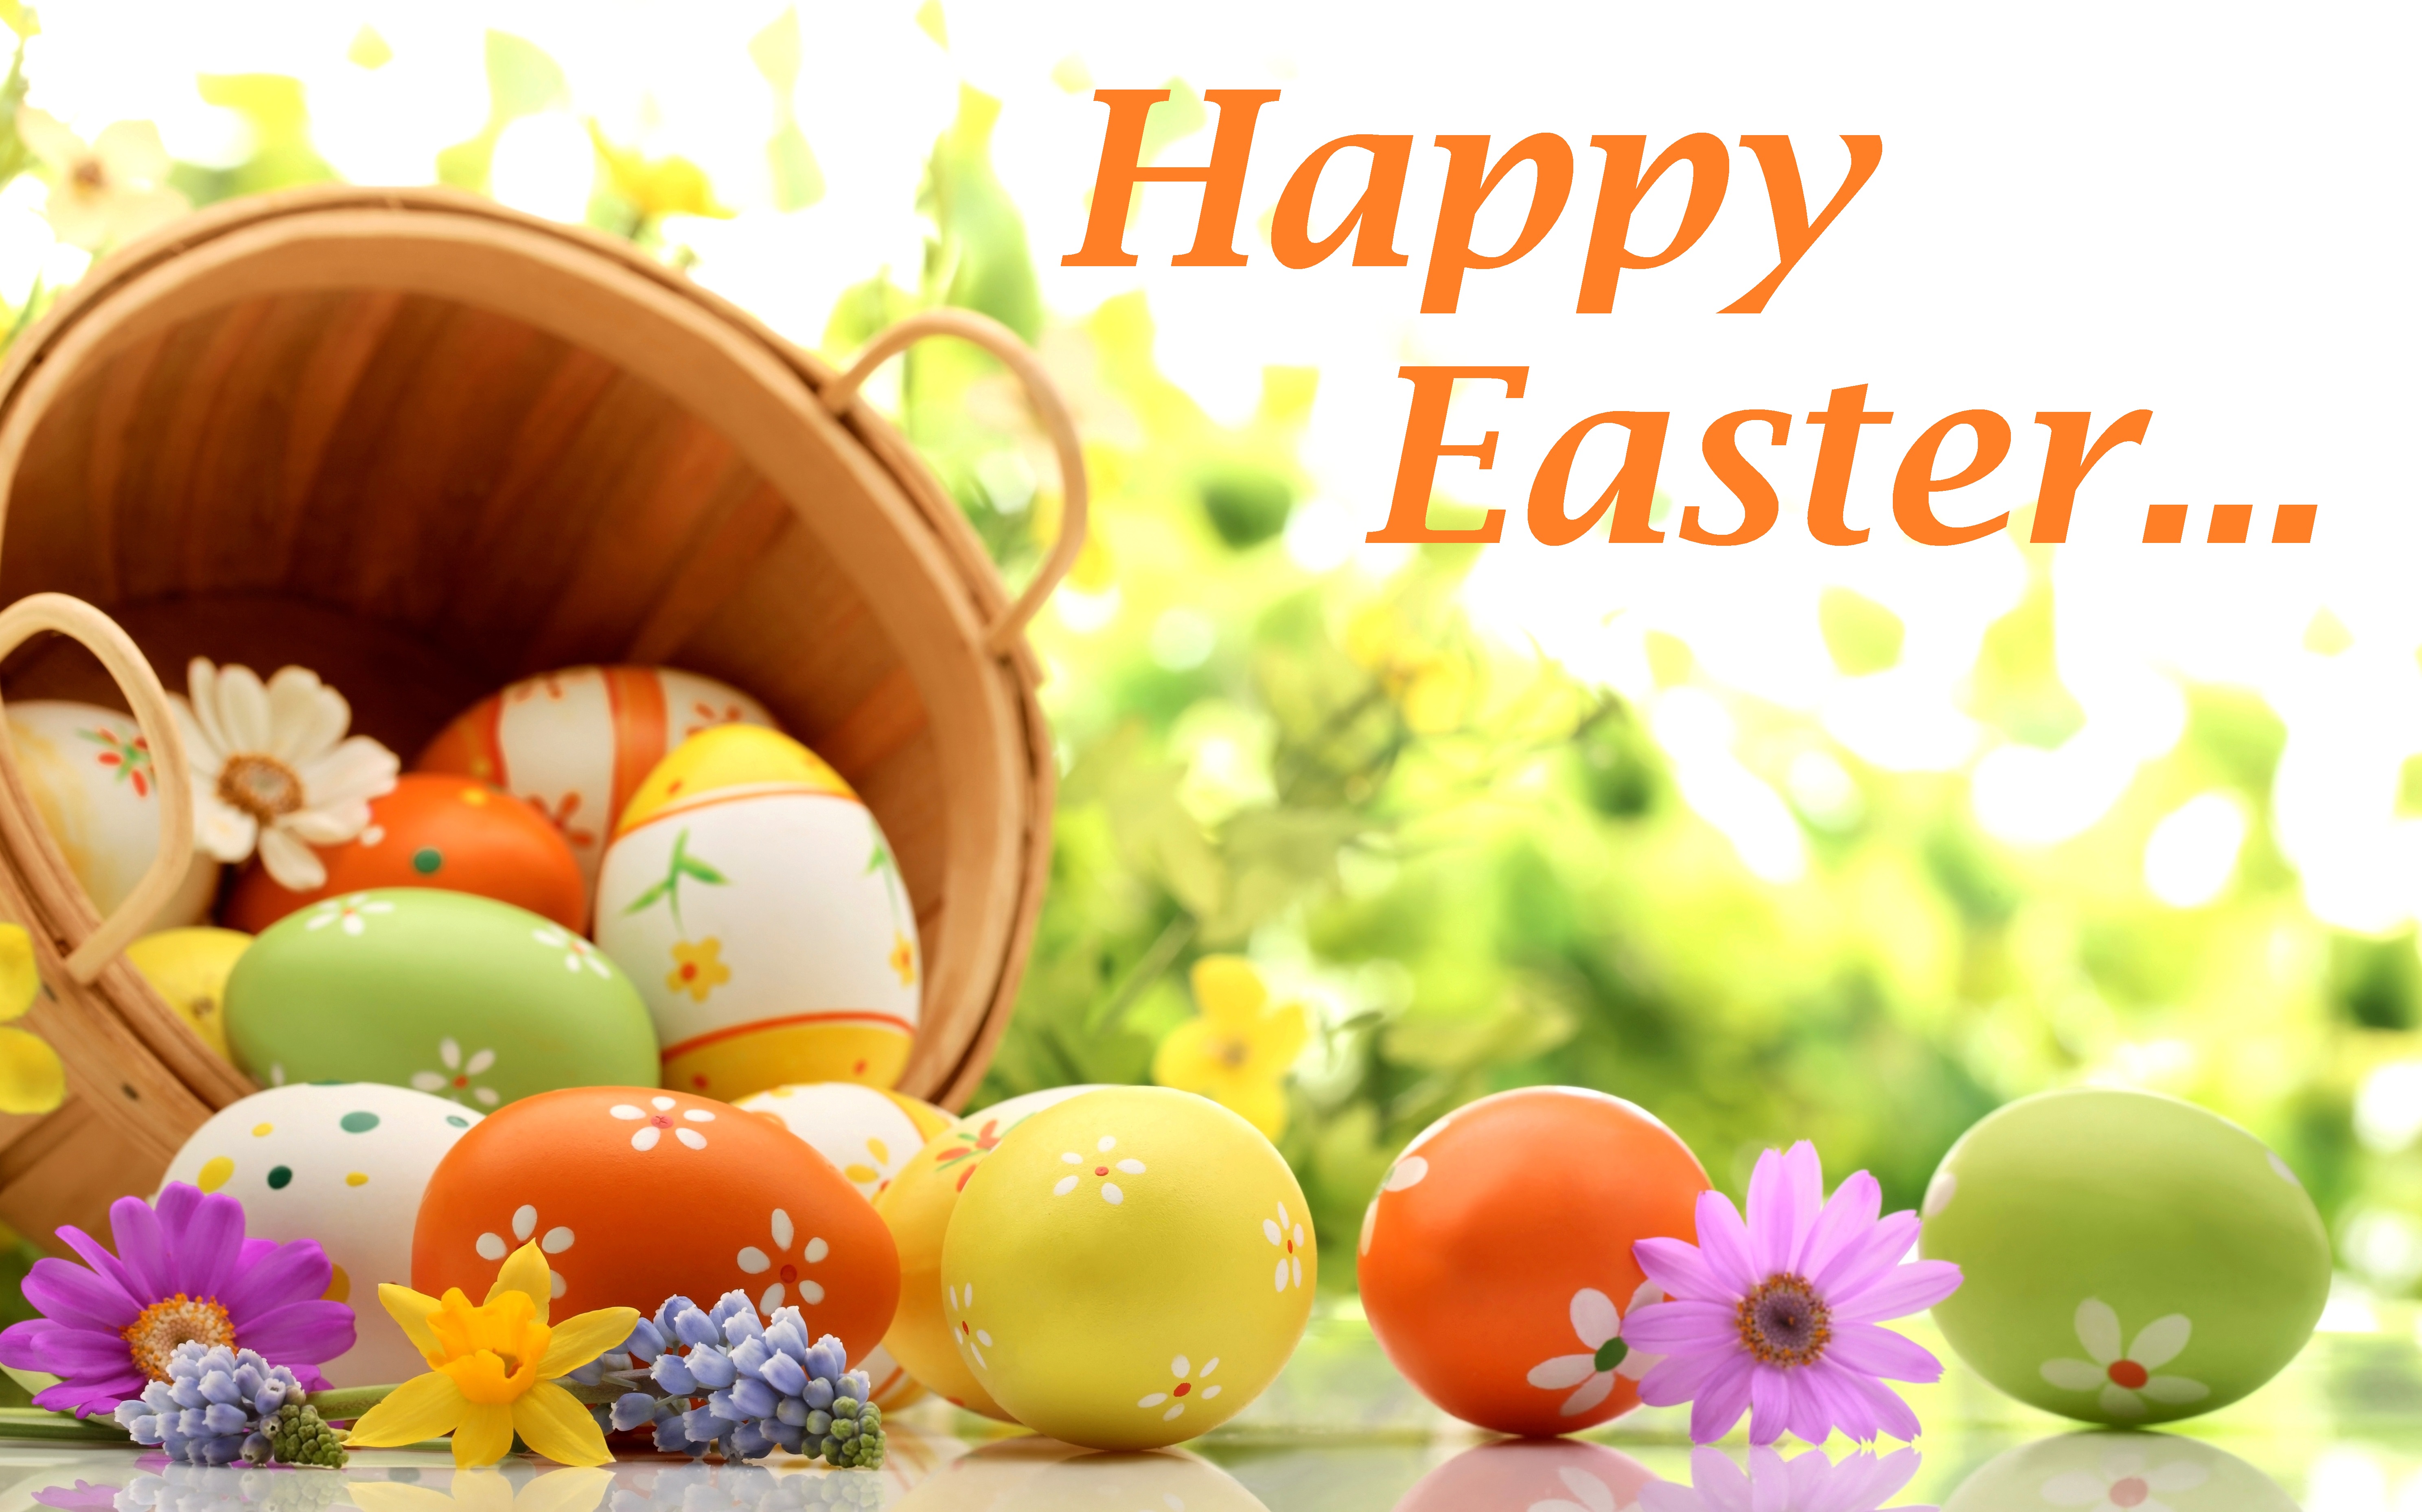 lovely happy easter image